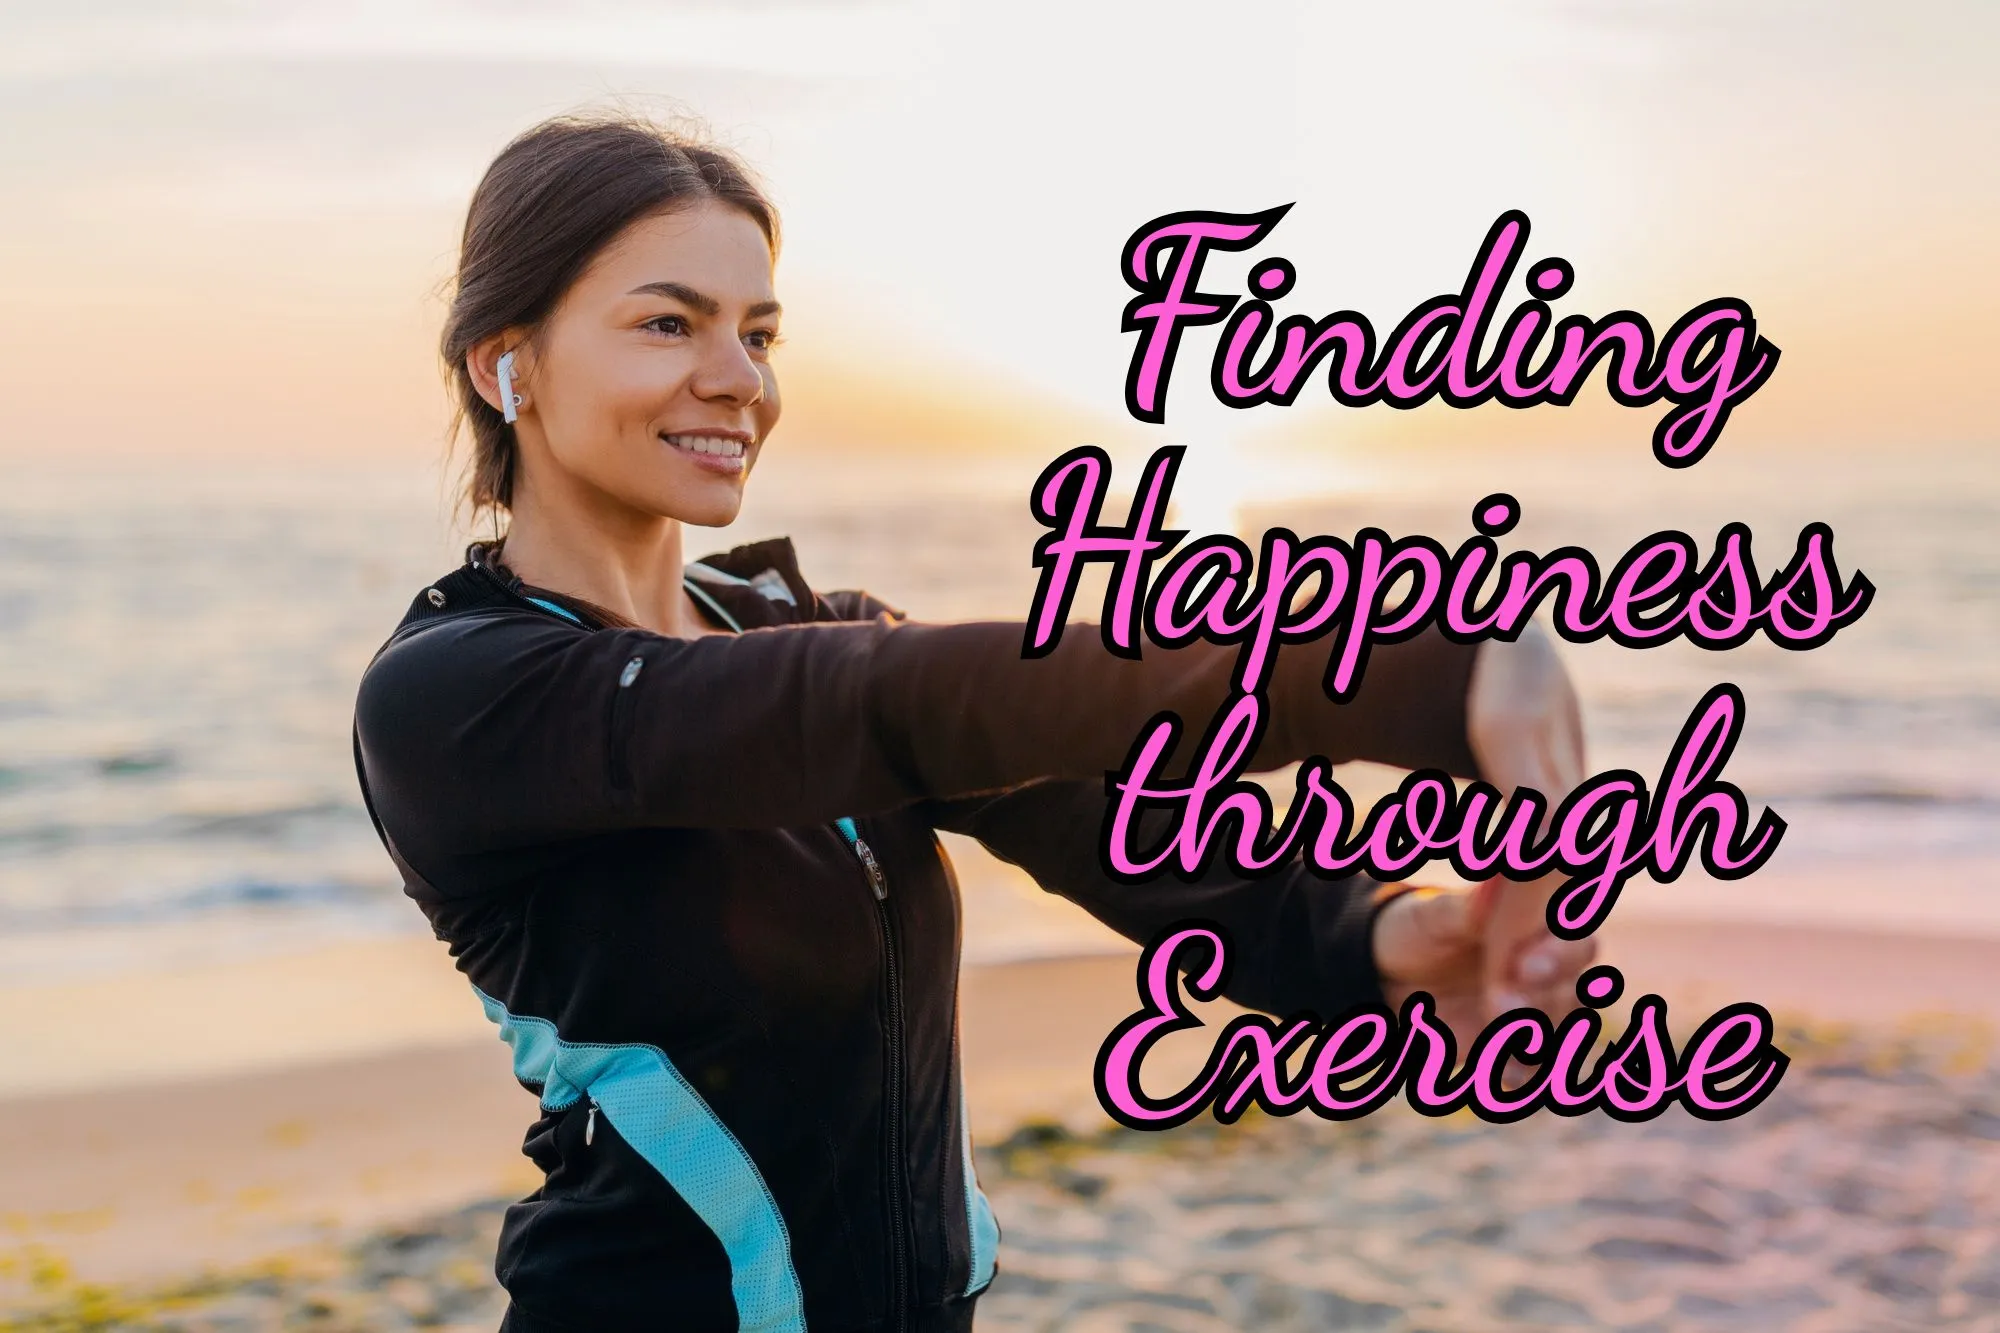 Finding happiness through exercise